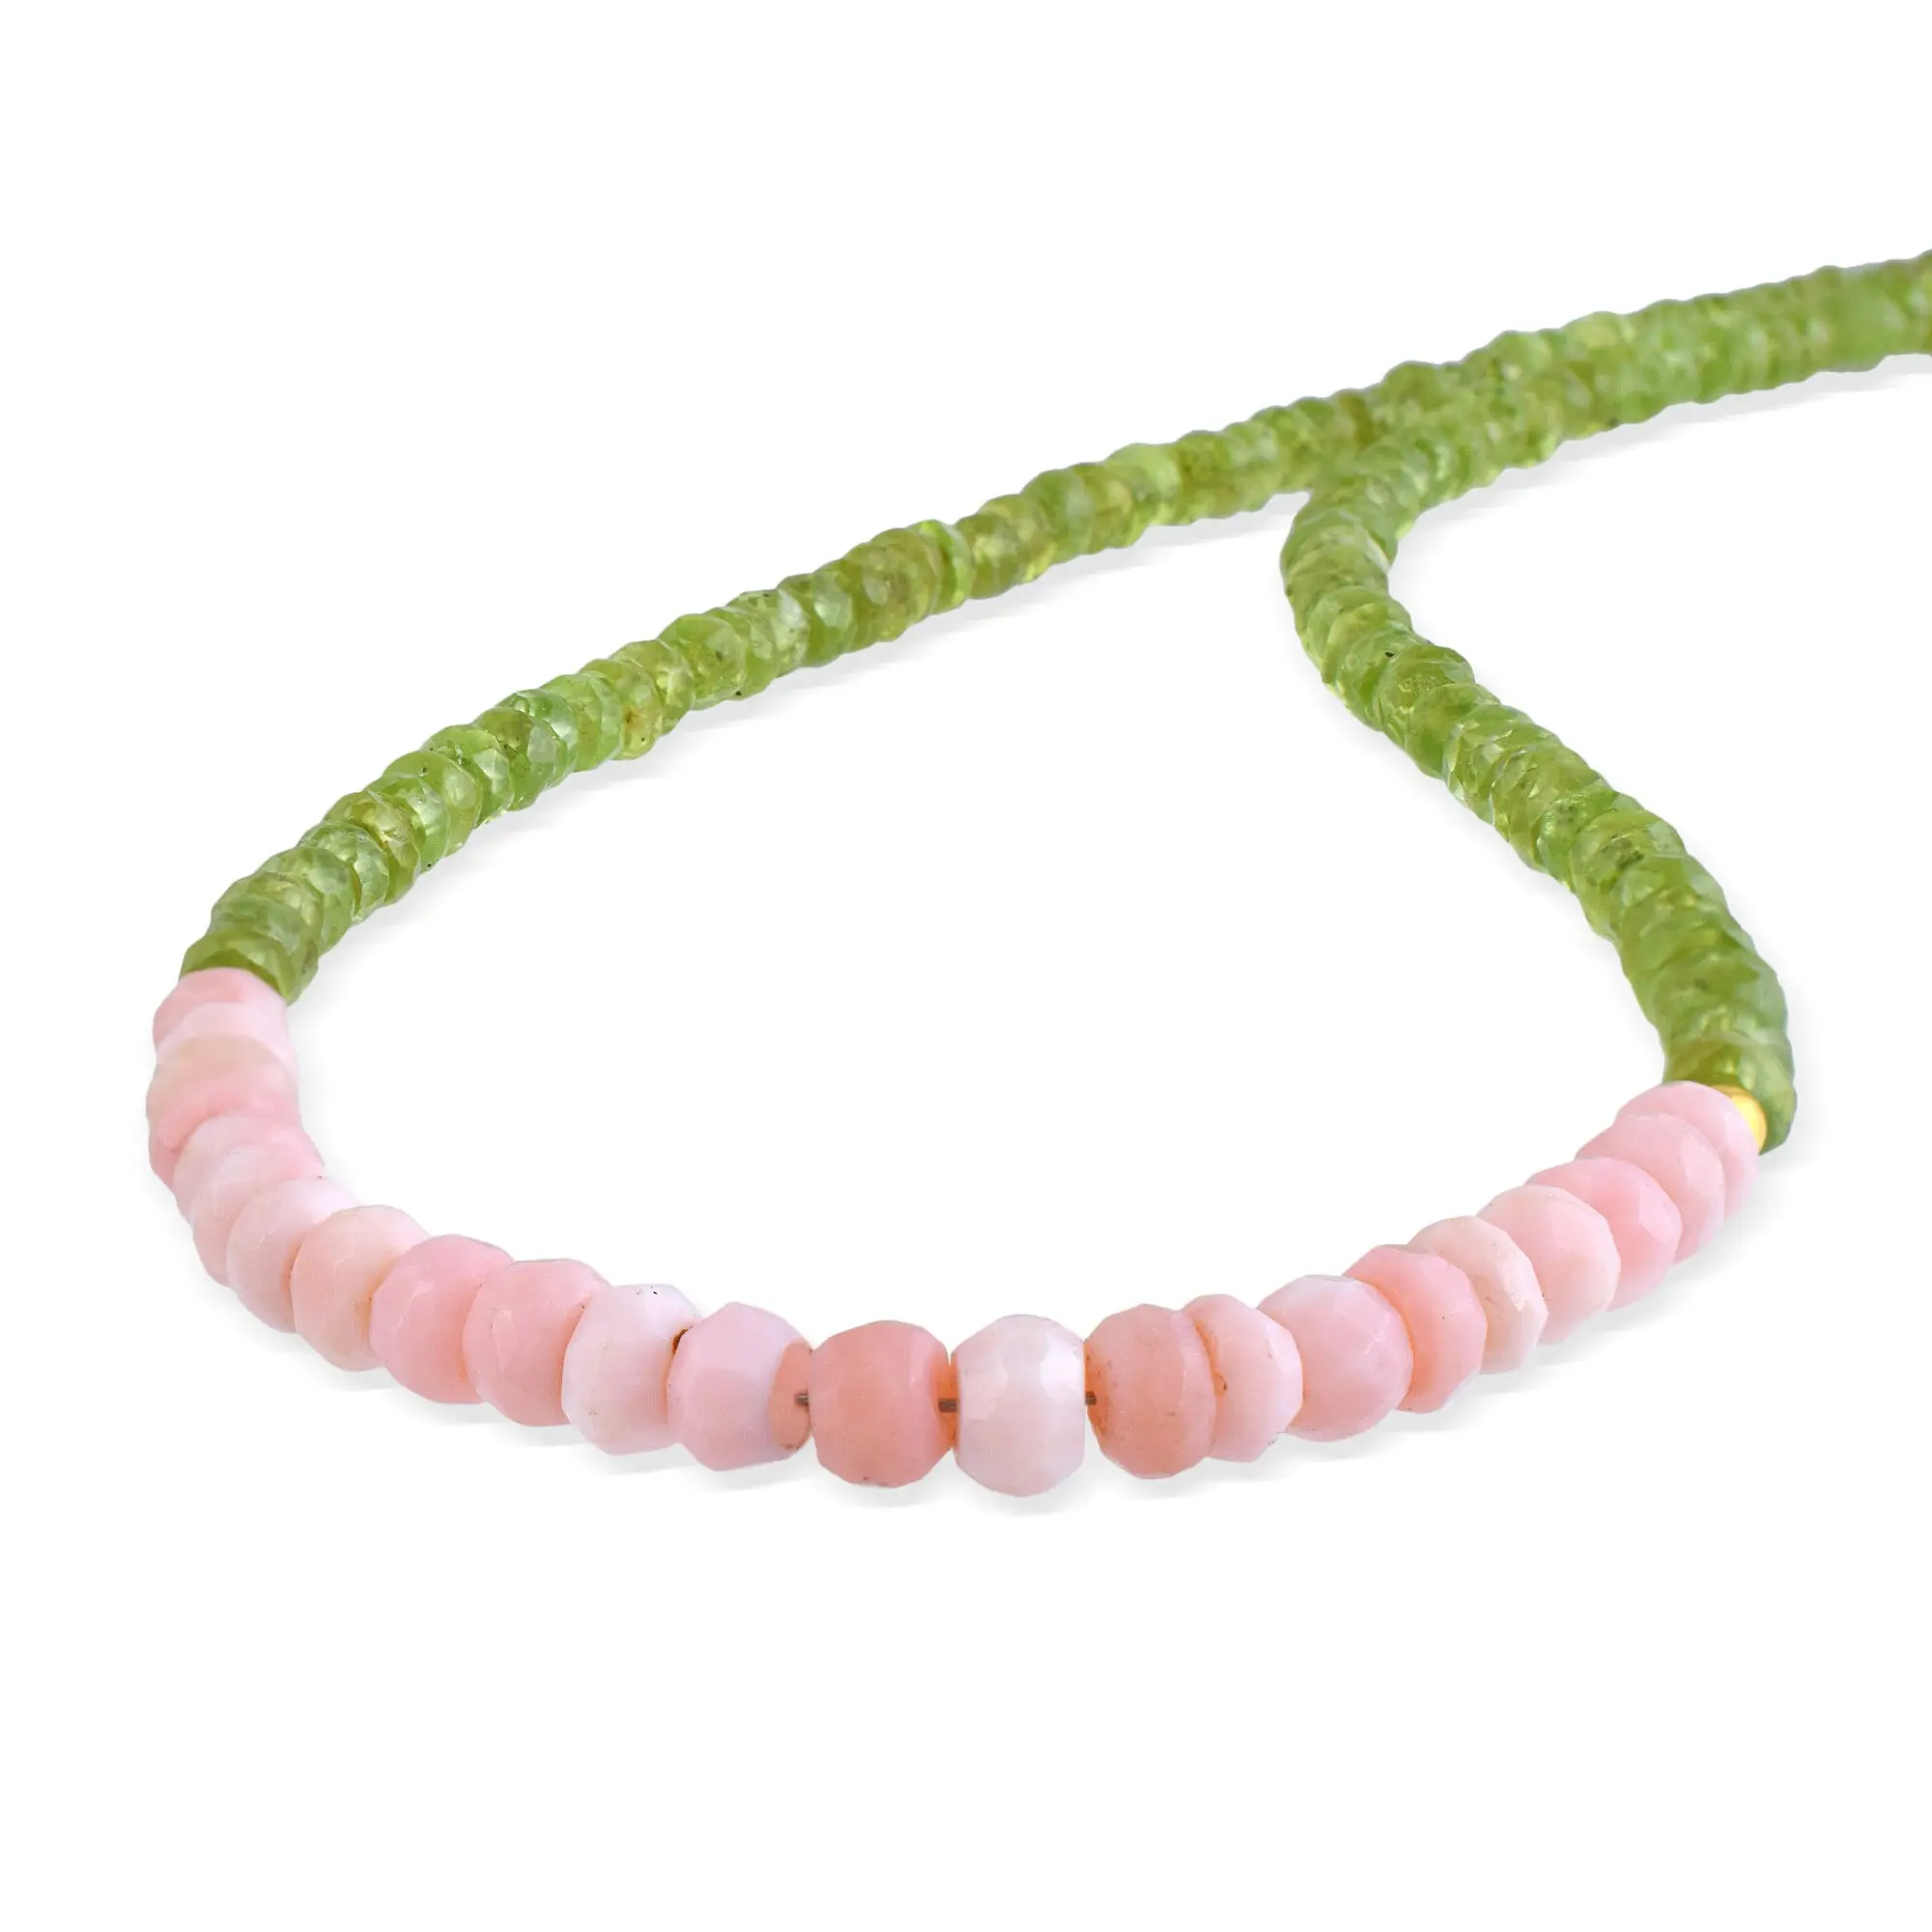 Mind Blowing Peridot & Rose Quartz Beads Necklace Peridot Gemstone Rose Quartz Beads Faceted Rondelle Beads Necklace Gif For Her